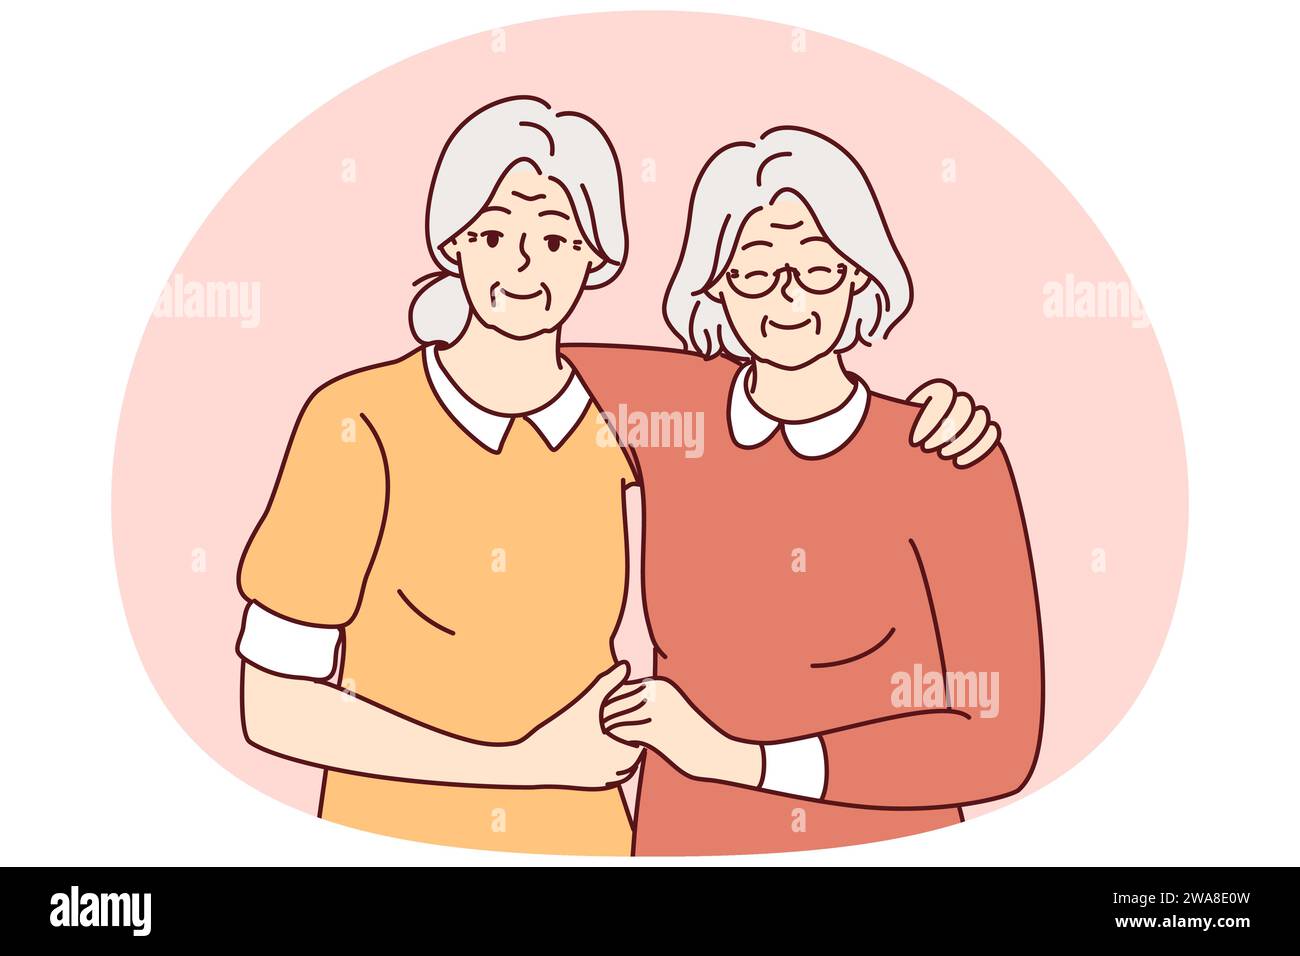 Portrait of smiling elderly female friends hugging showing long lasting friendship. Happy senior grandmothers embrace show unity and care. Vector illustration. Stock Vector